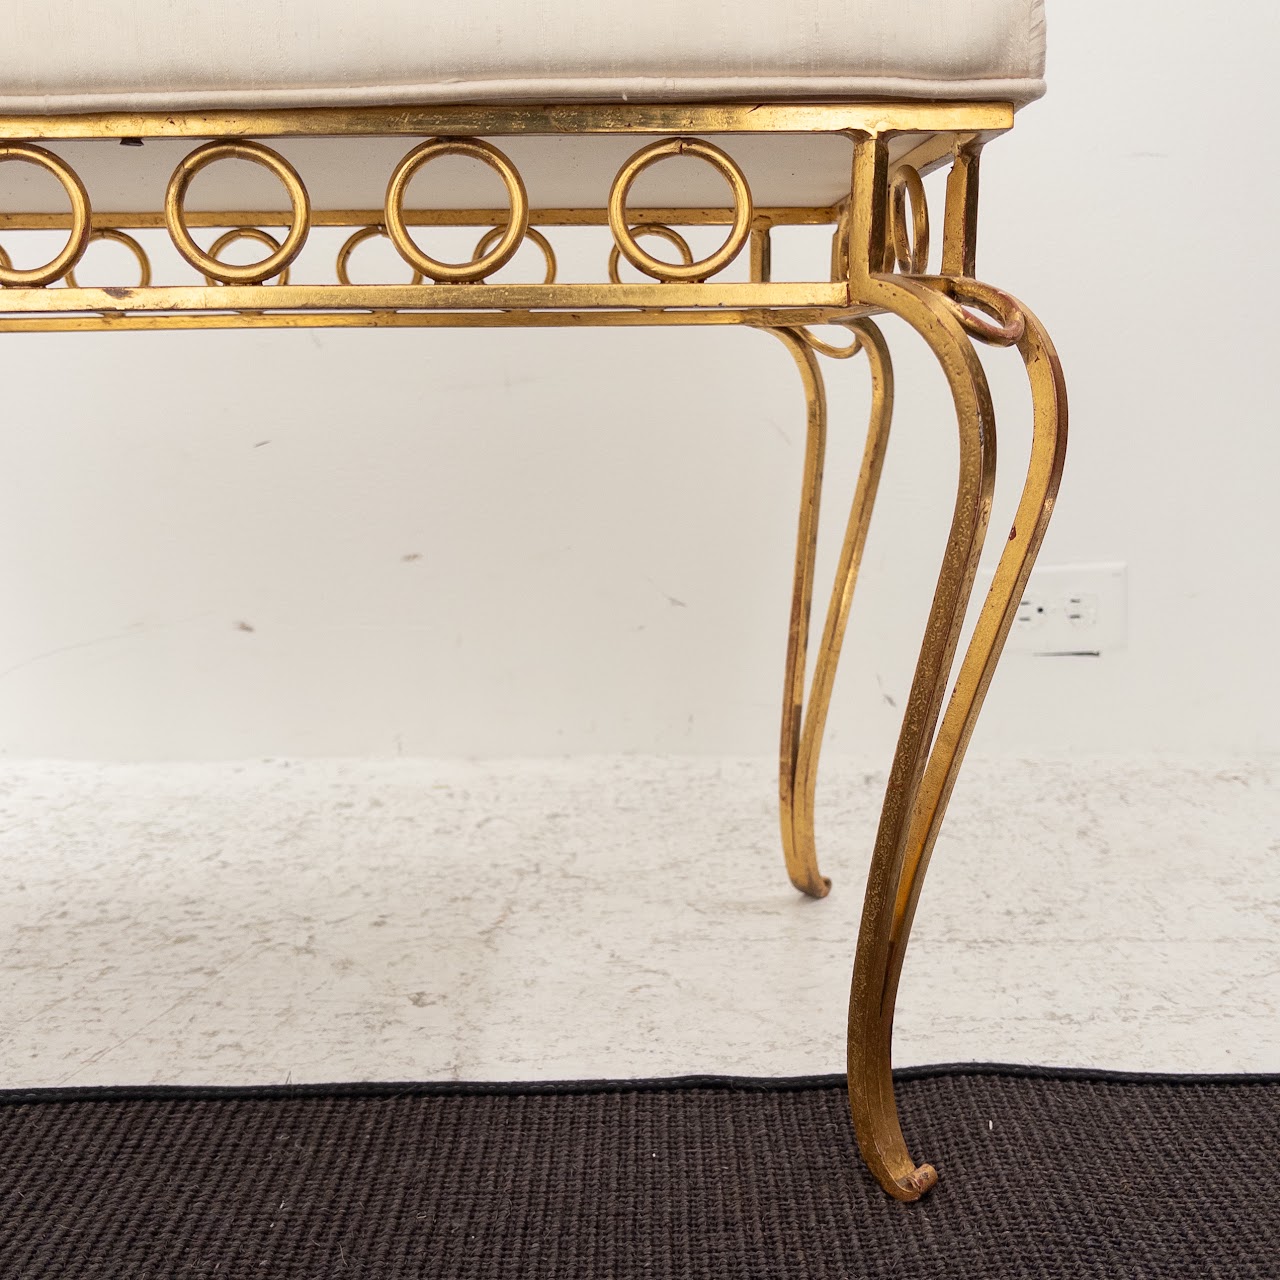 Gilded Wrought Iron Silk Upholstered Bench Pair